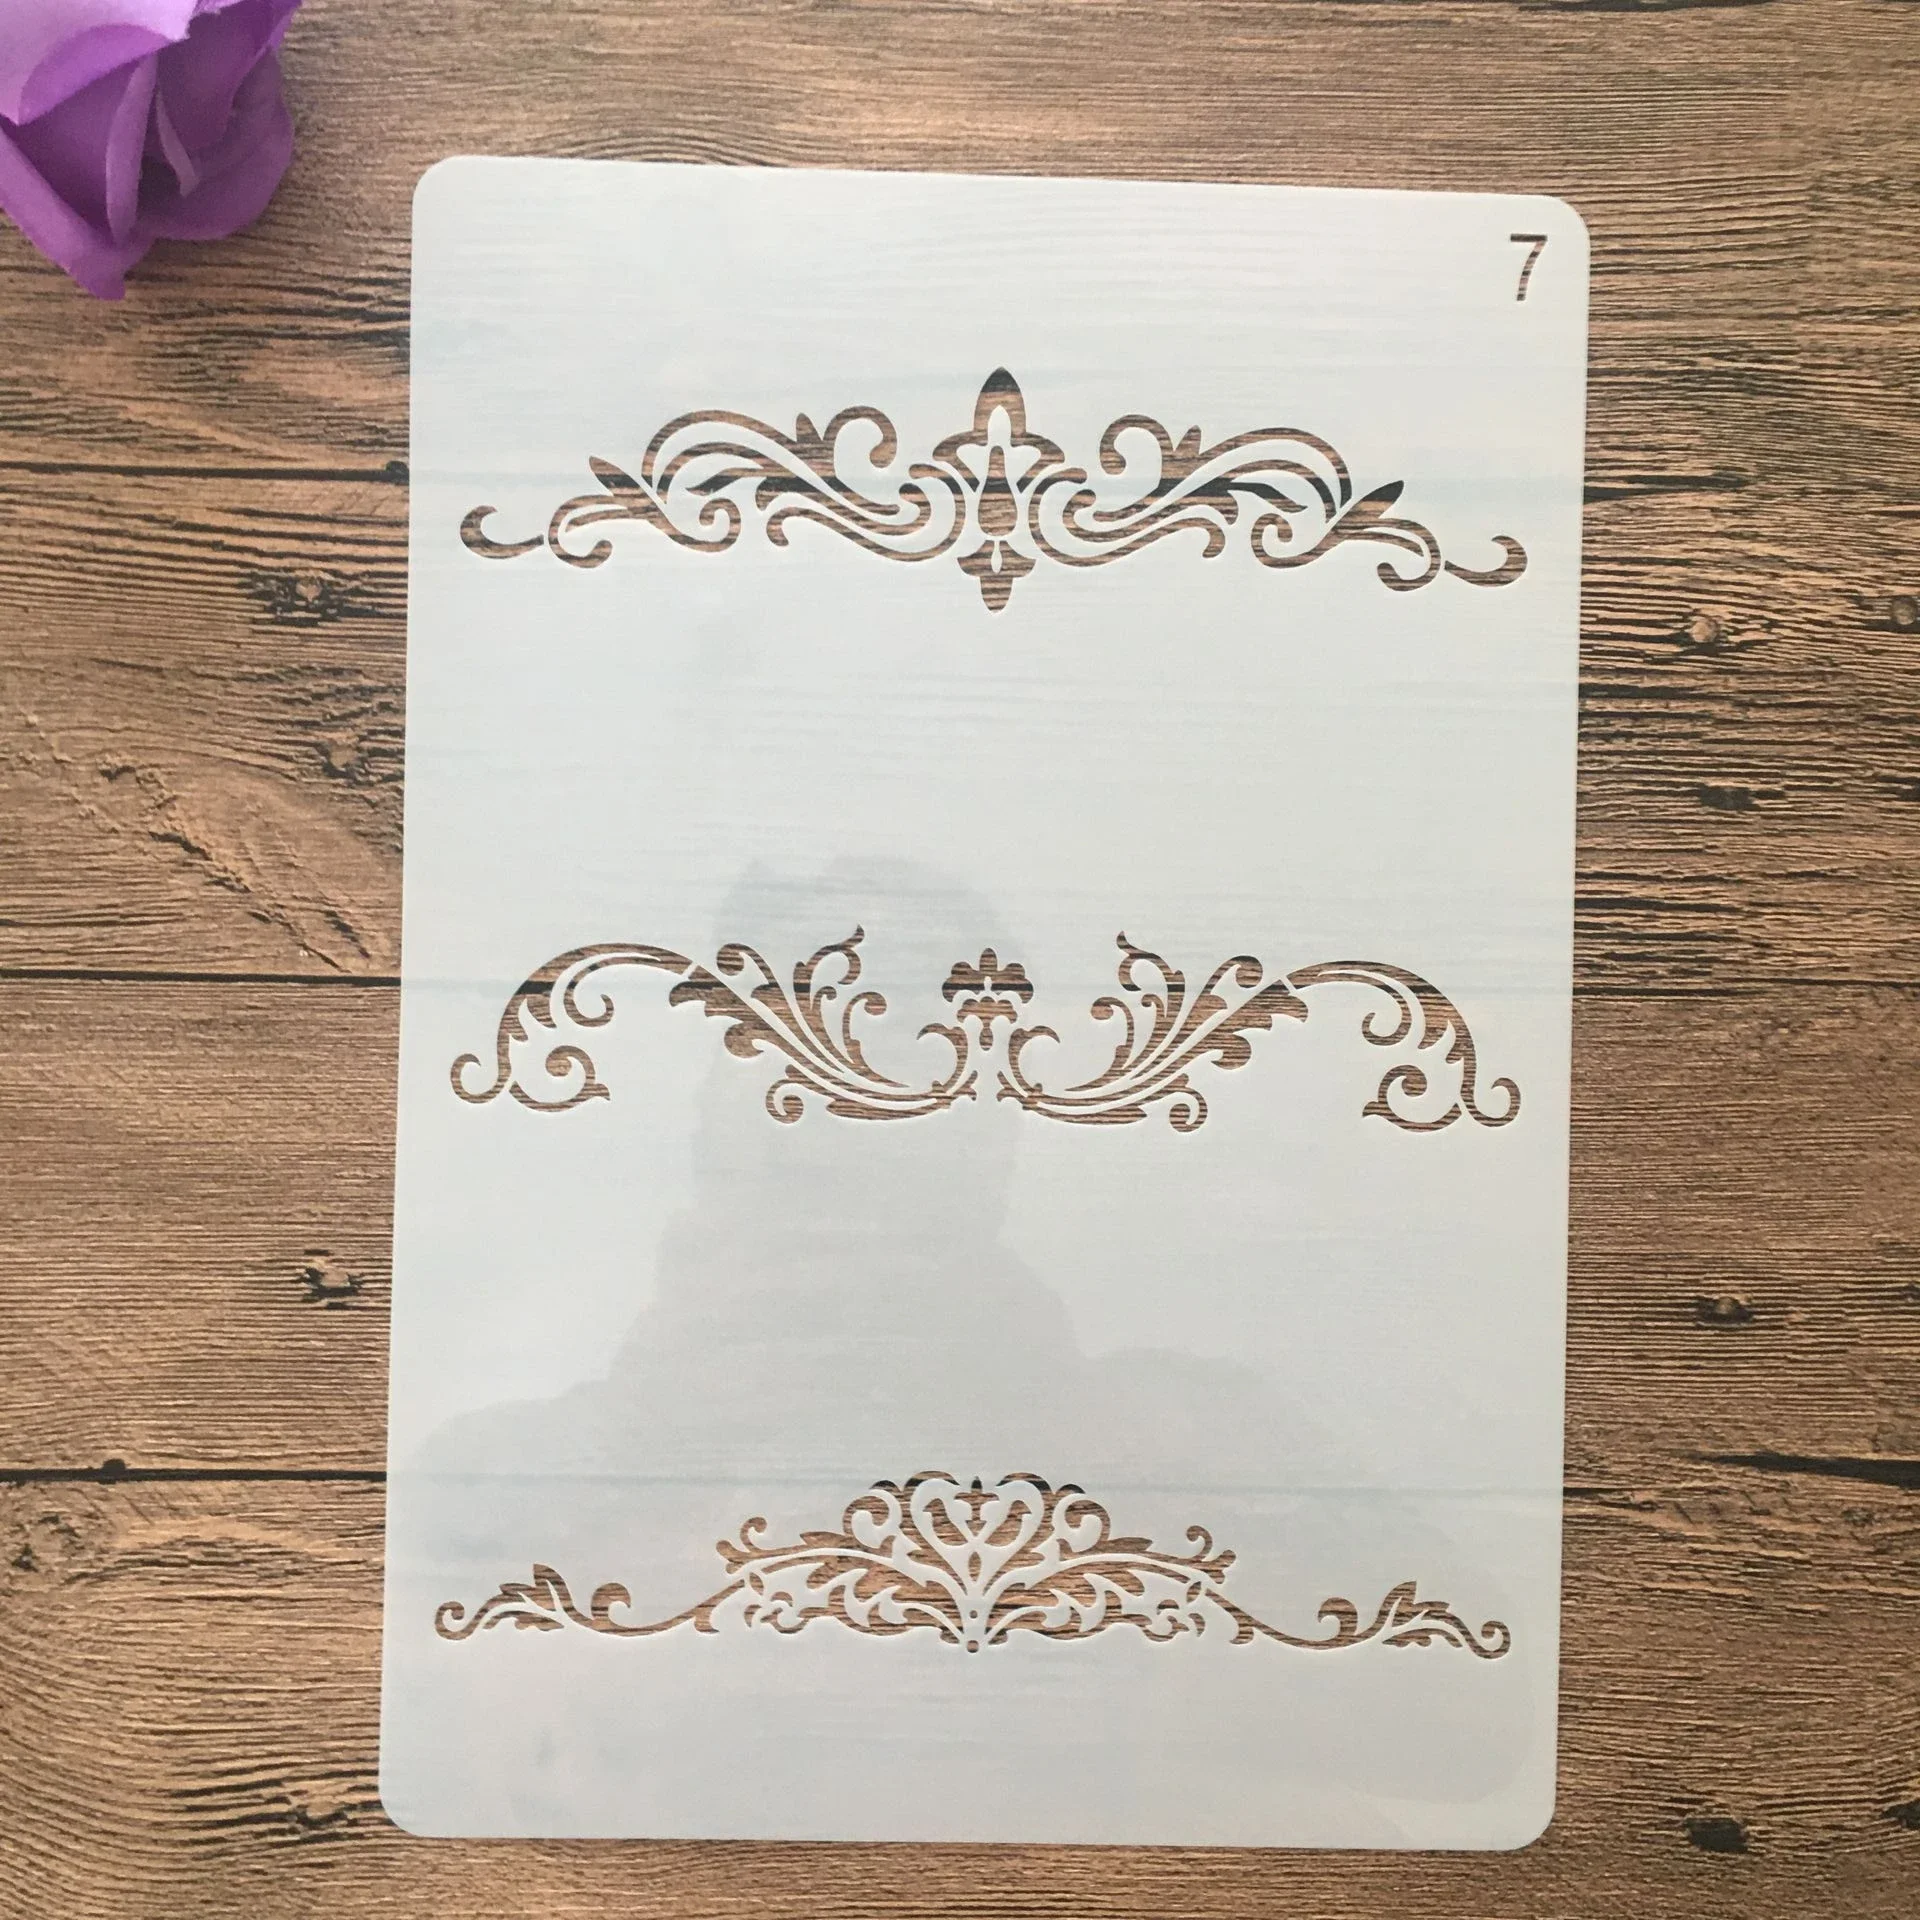 A4 29 * 21cm Crown Flower wall layered stencil painting scrapbook stamp album decoration embossed paper card template decoration beyond grateful card 50pcs pack white thank you card for supporting my small business packaging cardfor gift decoration label